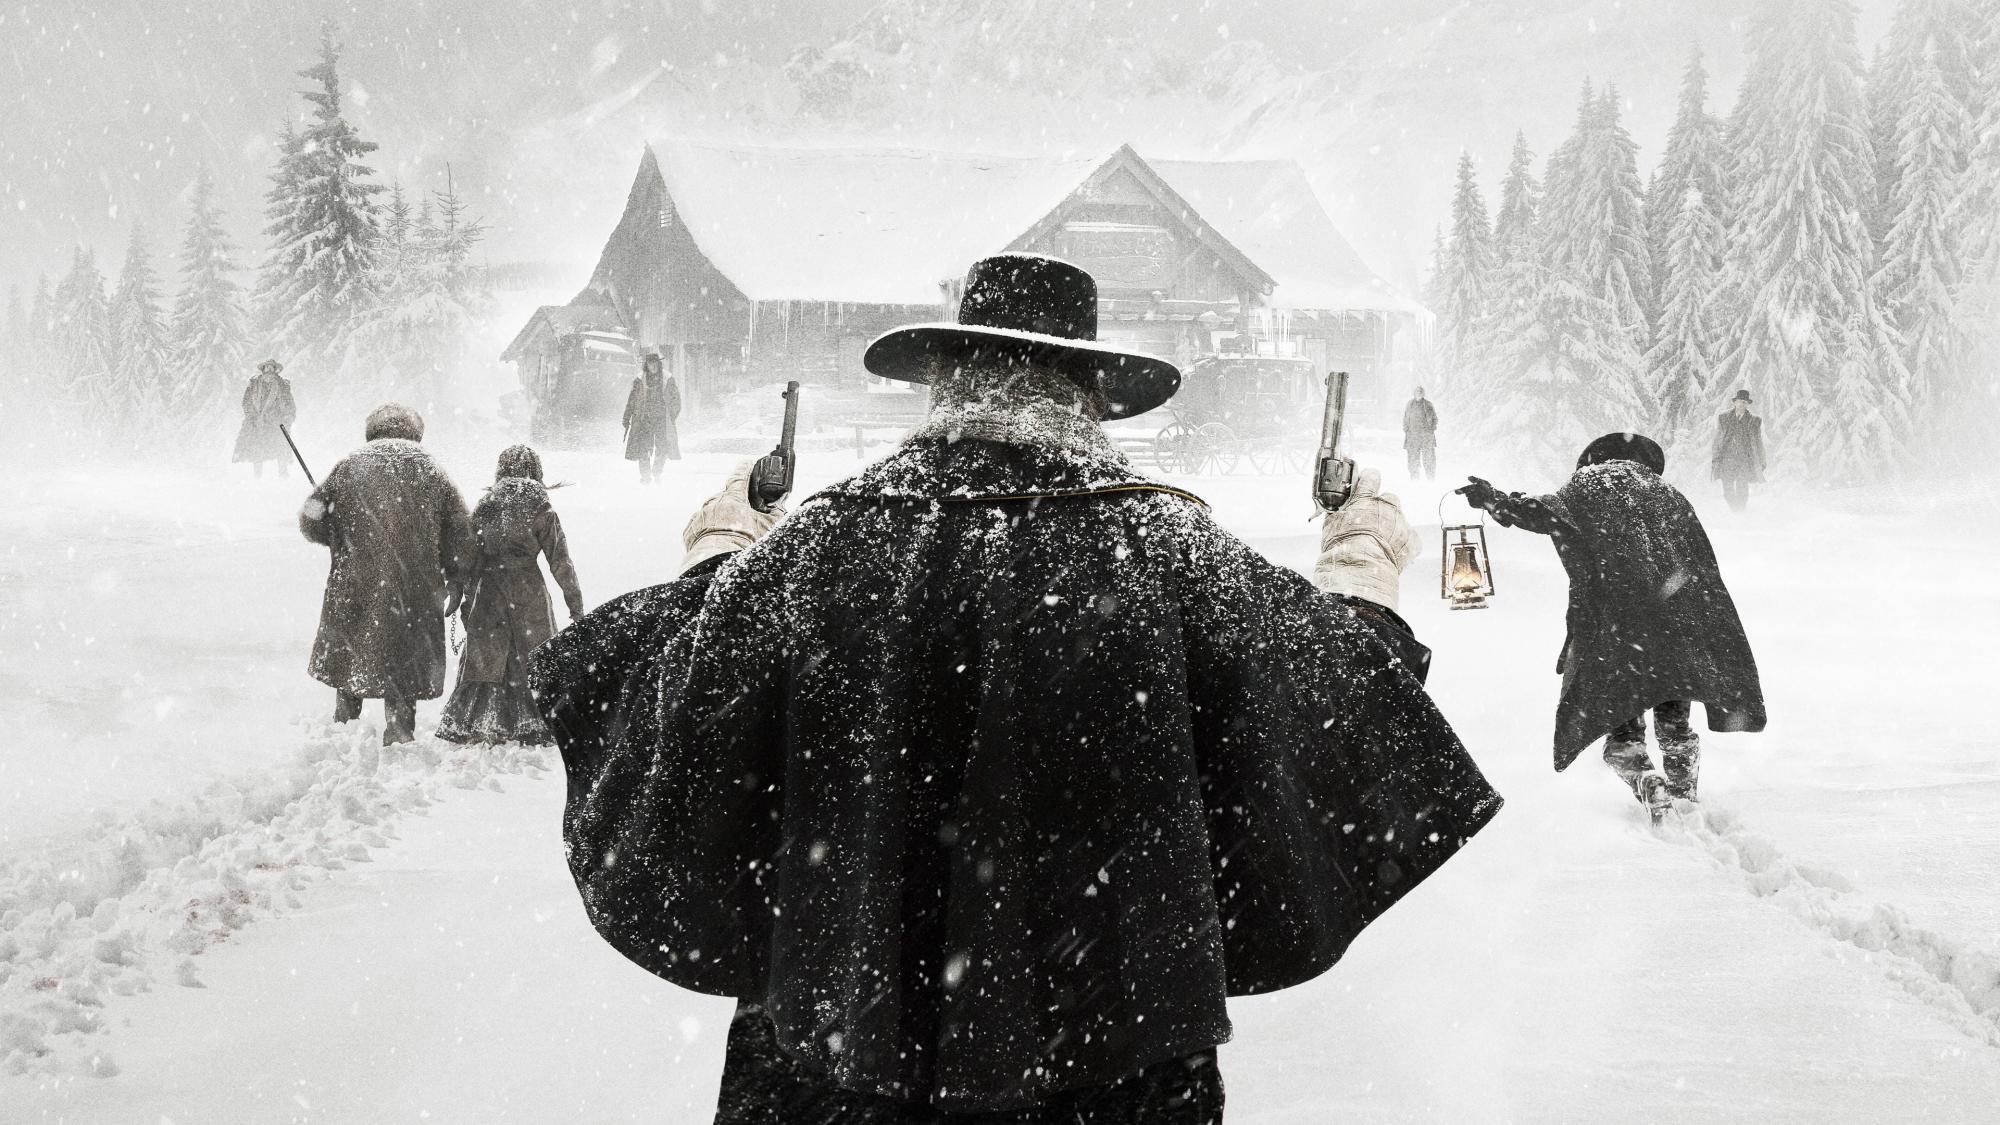 Backdrop Image for The Hateful Eight